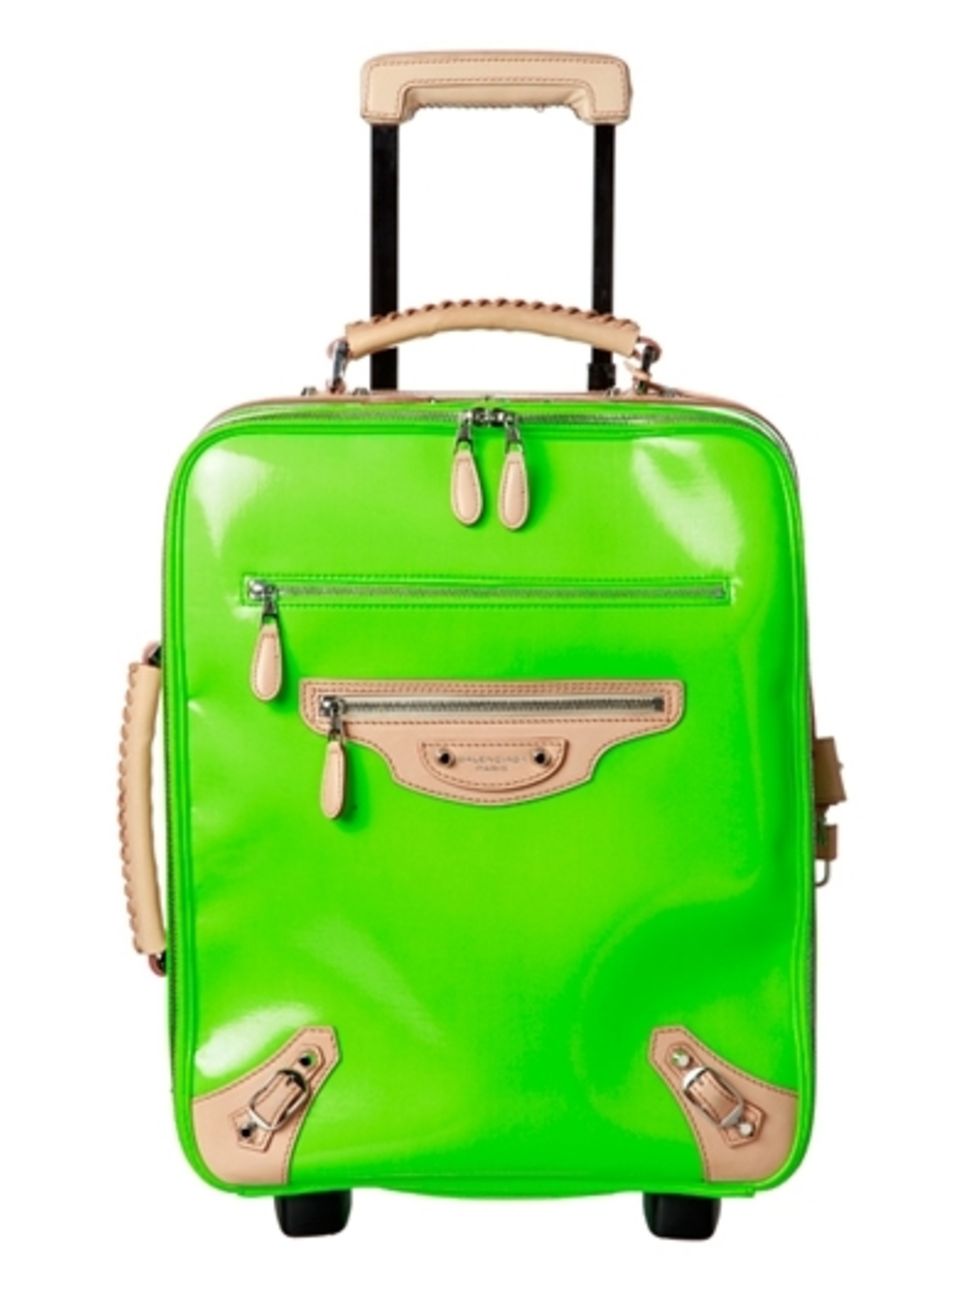 Green, Product, Metal, Teal, Turquoise, Aqua, Rolling, Parallel, Baggage, Iron, 